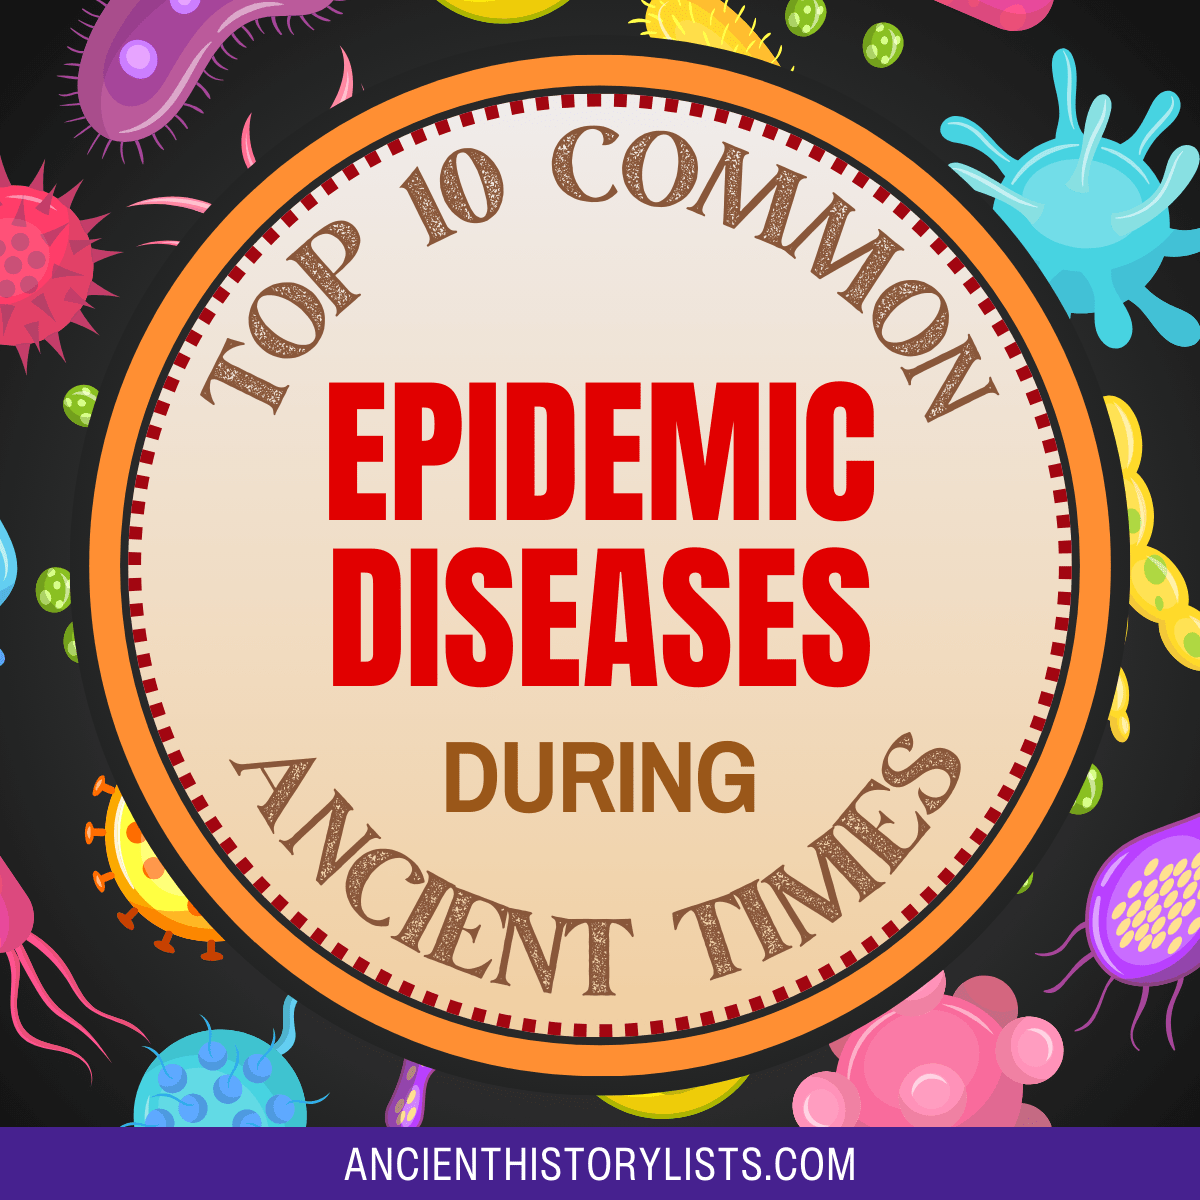 Epidemic Diseases That Were Common in the Ancient World